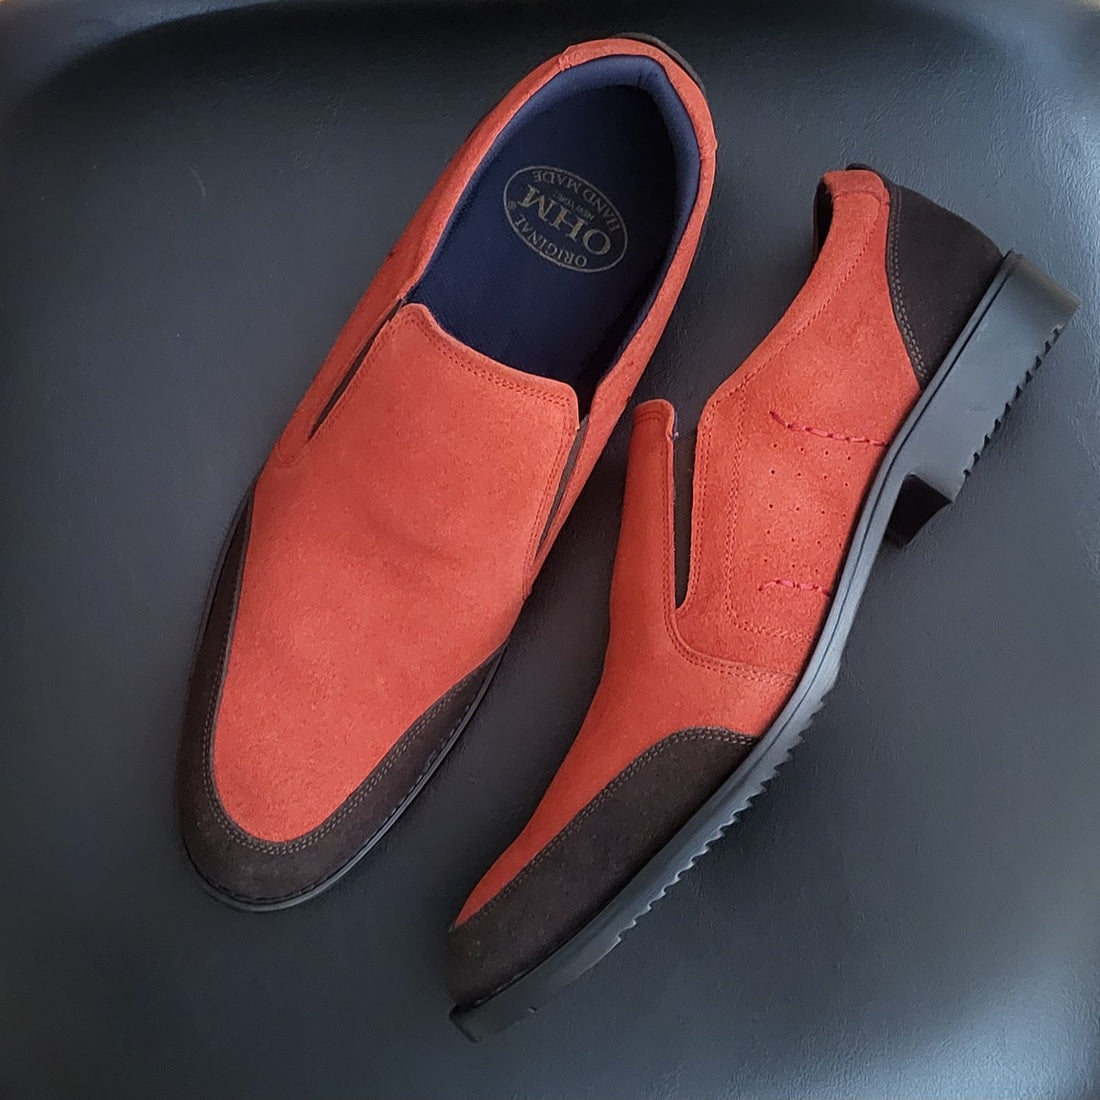 OHM New York Vamp Stitched Leather Slip-on Shoes